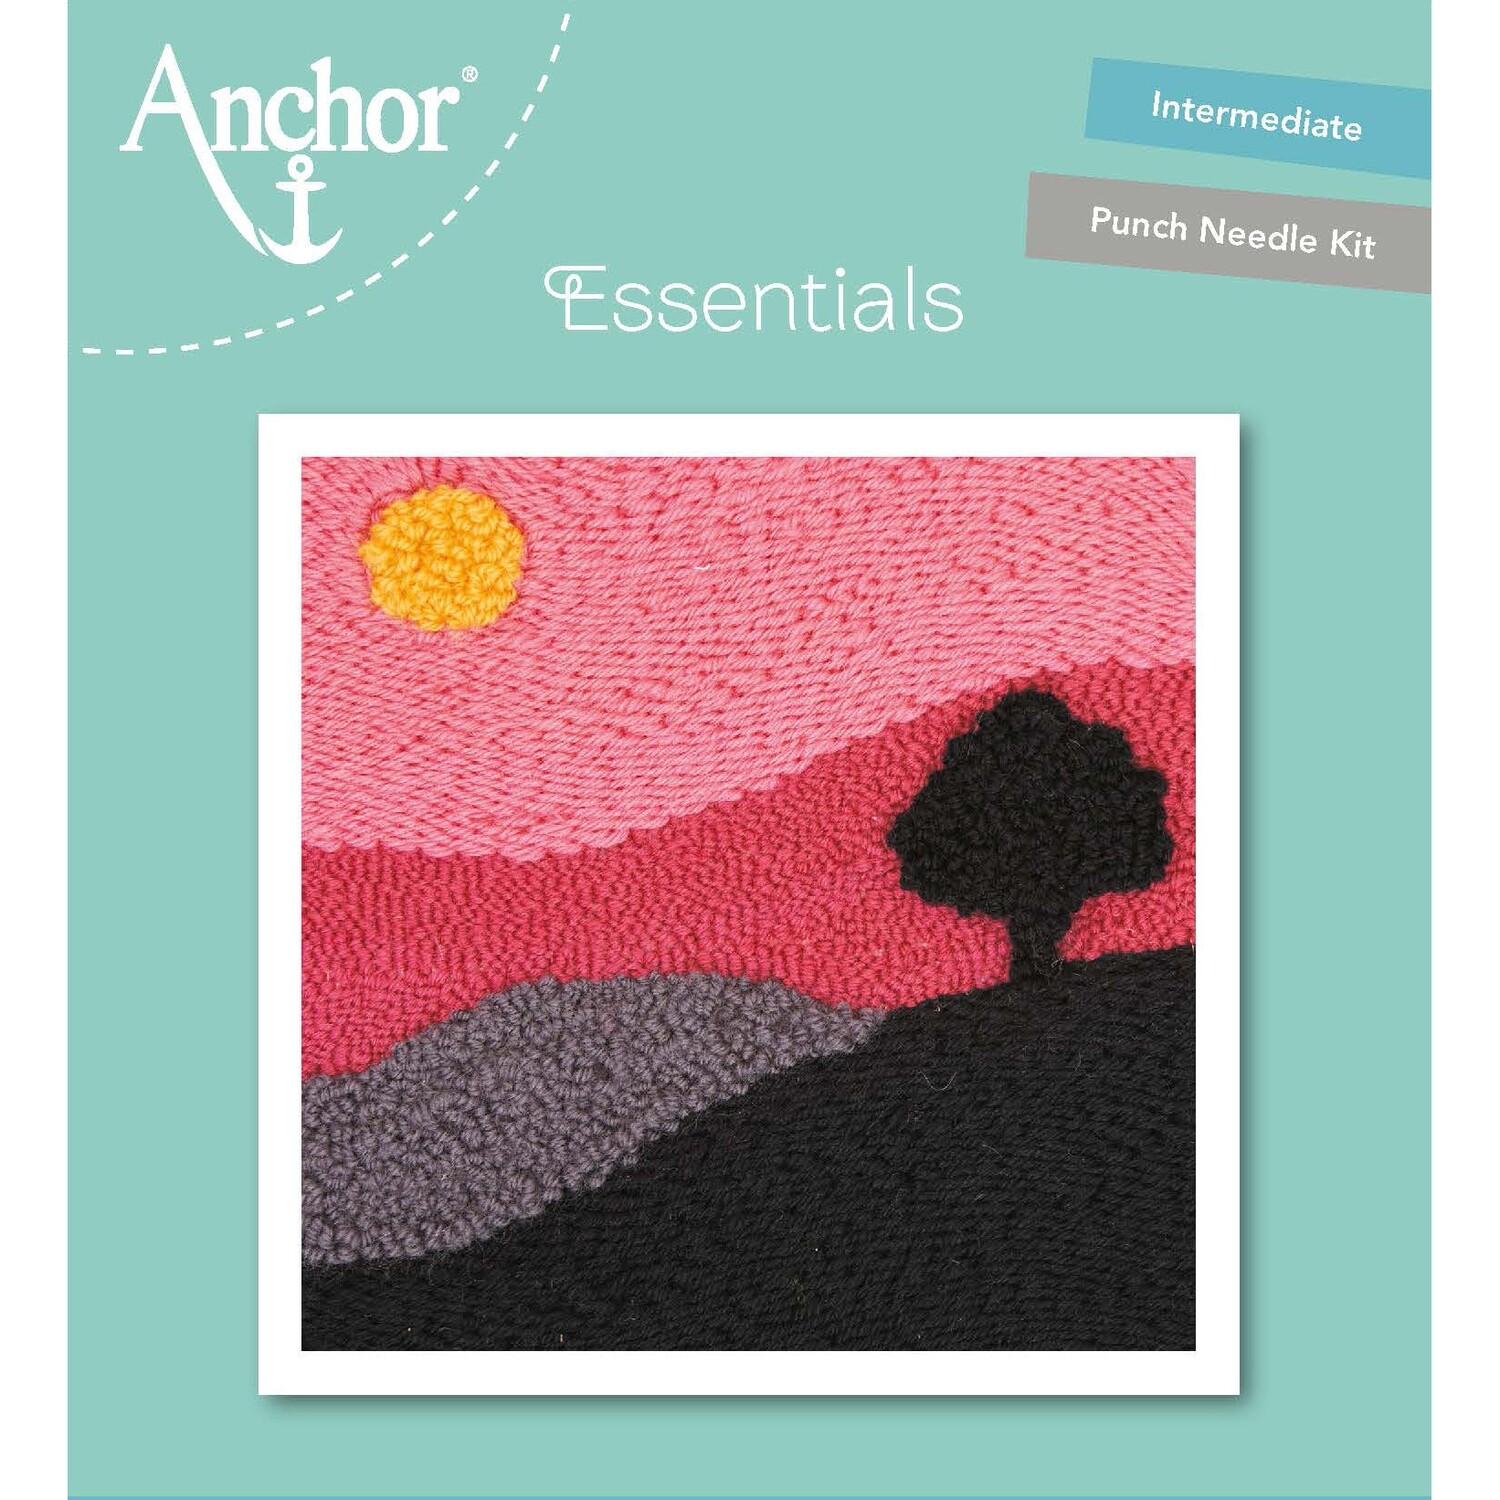 Anchor Essentials Punch Needle Kit - Tranquil tree (15 x 15 cm)